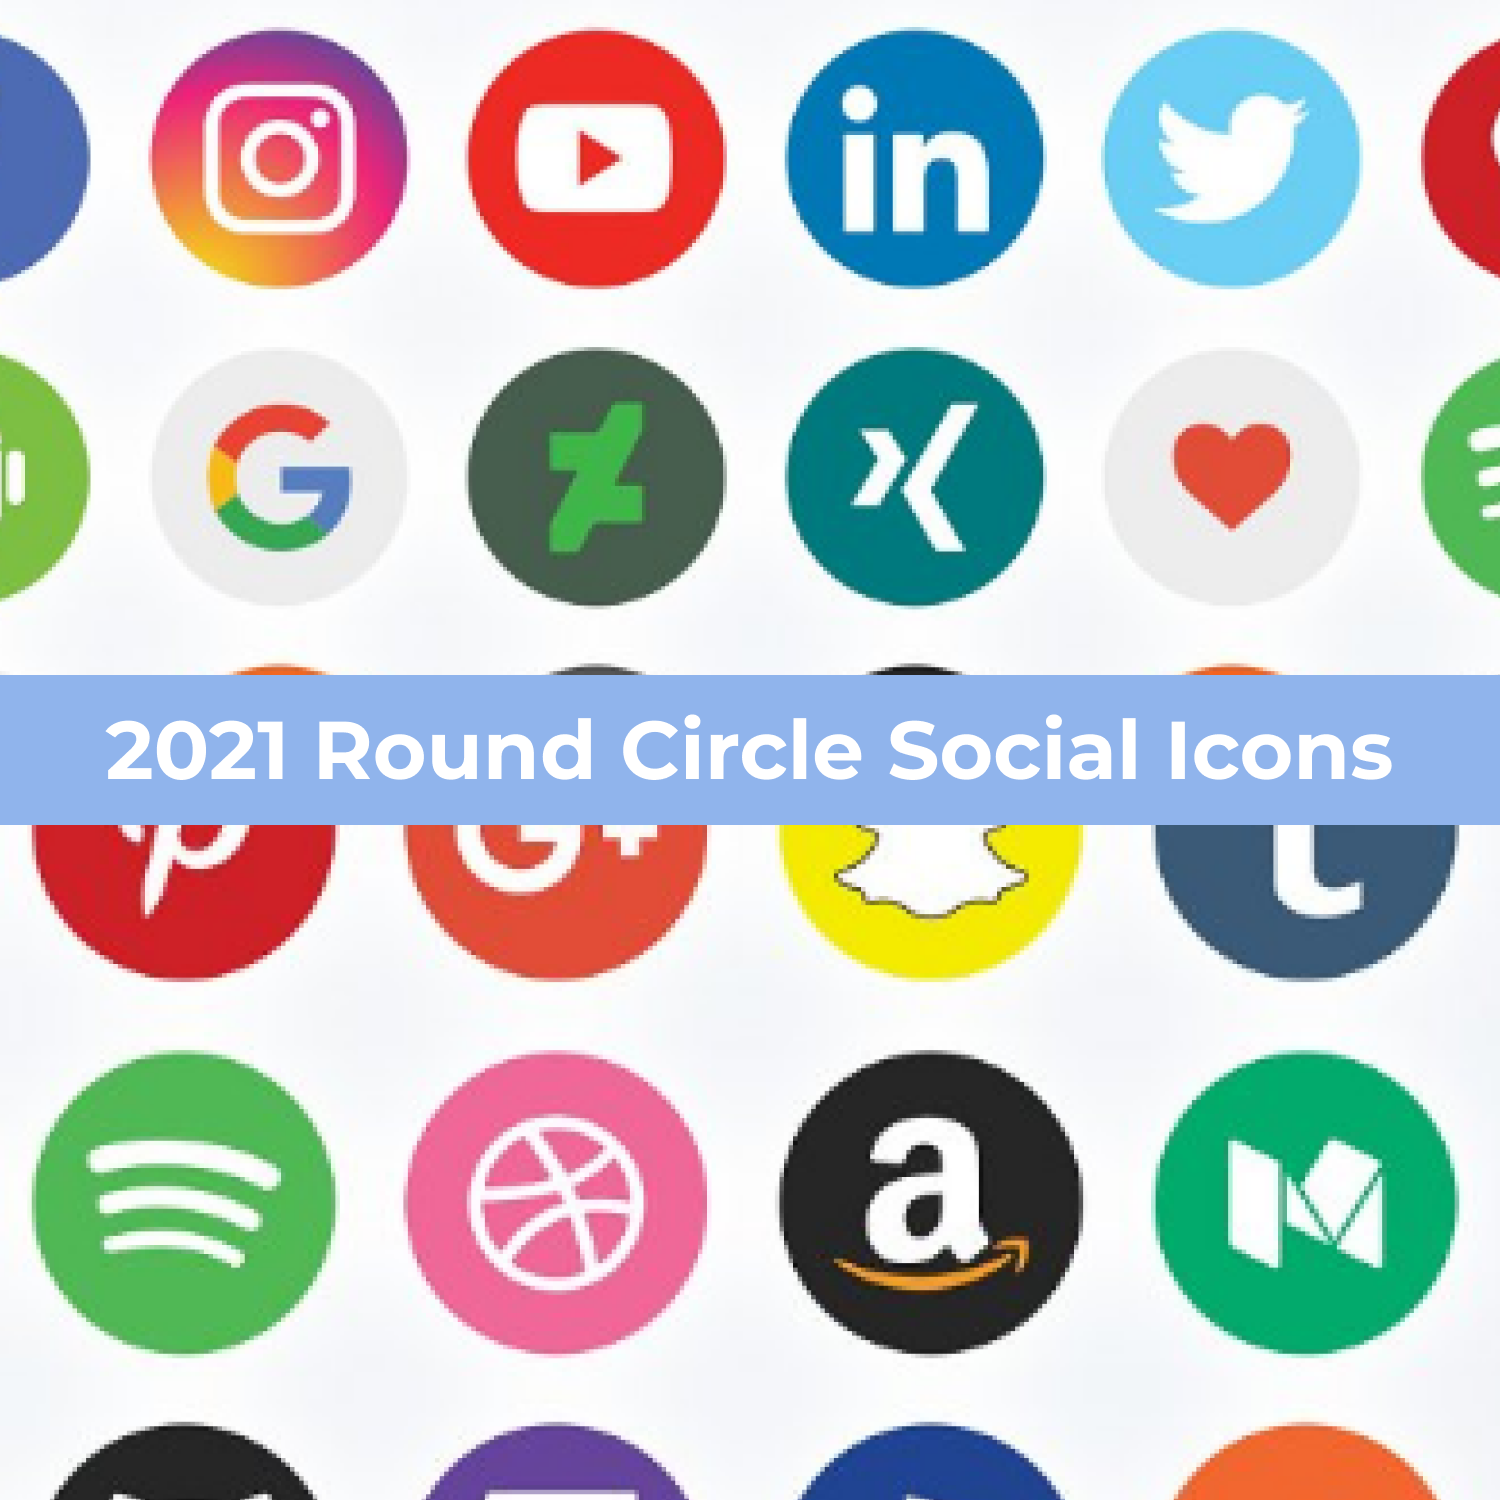 2021 Round Circle Social Icons cover image.